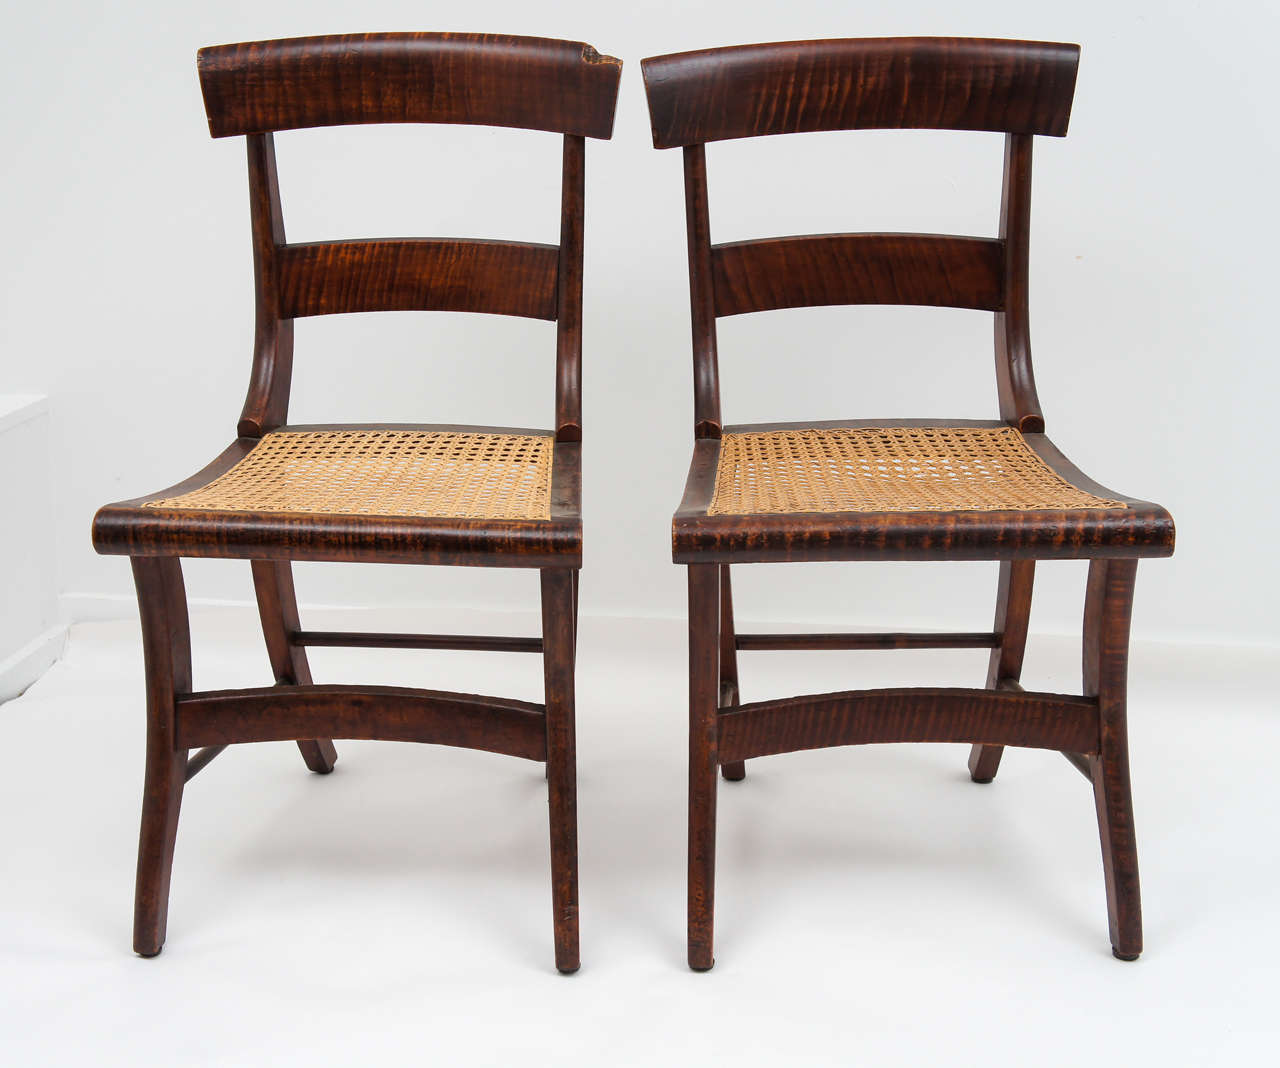 Victorian Set of Six Tiger Maple Dining Chairs, 19thC.